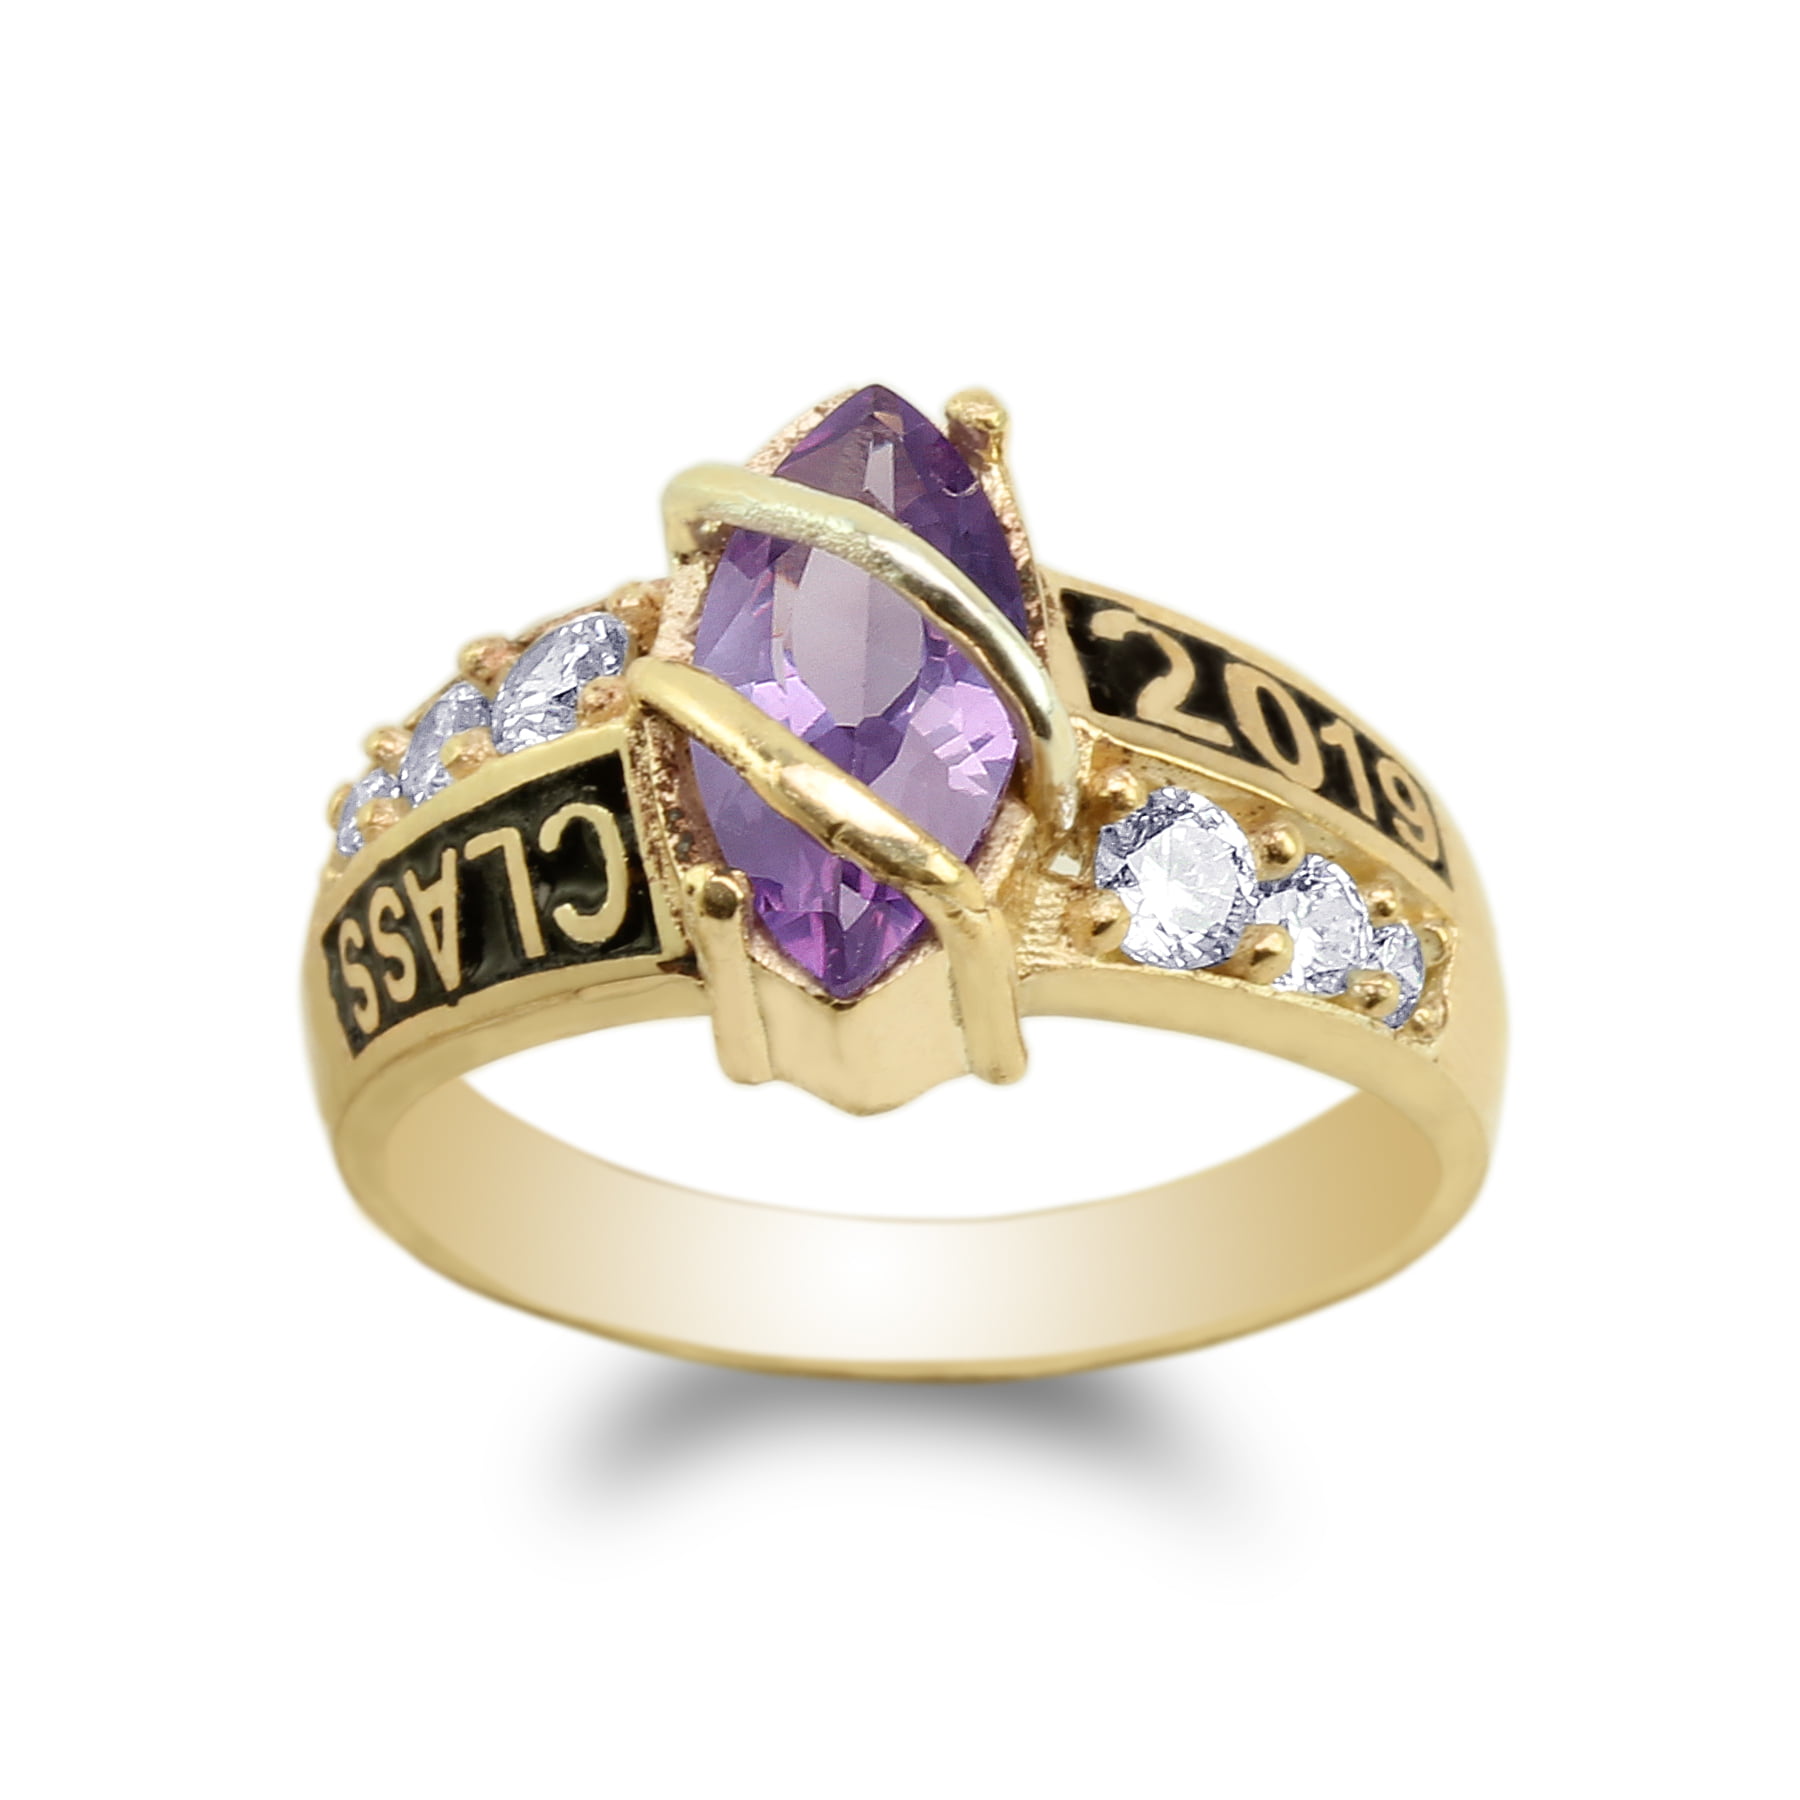 Details about   2 ct Round 3 stone Natural Amethyst Promise Bridal Wedding Ring 14k Yellow Gold 